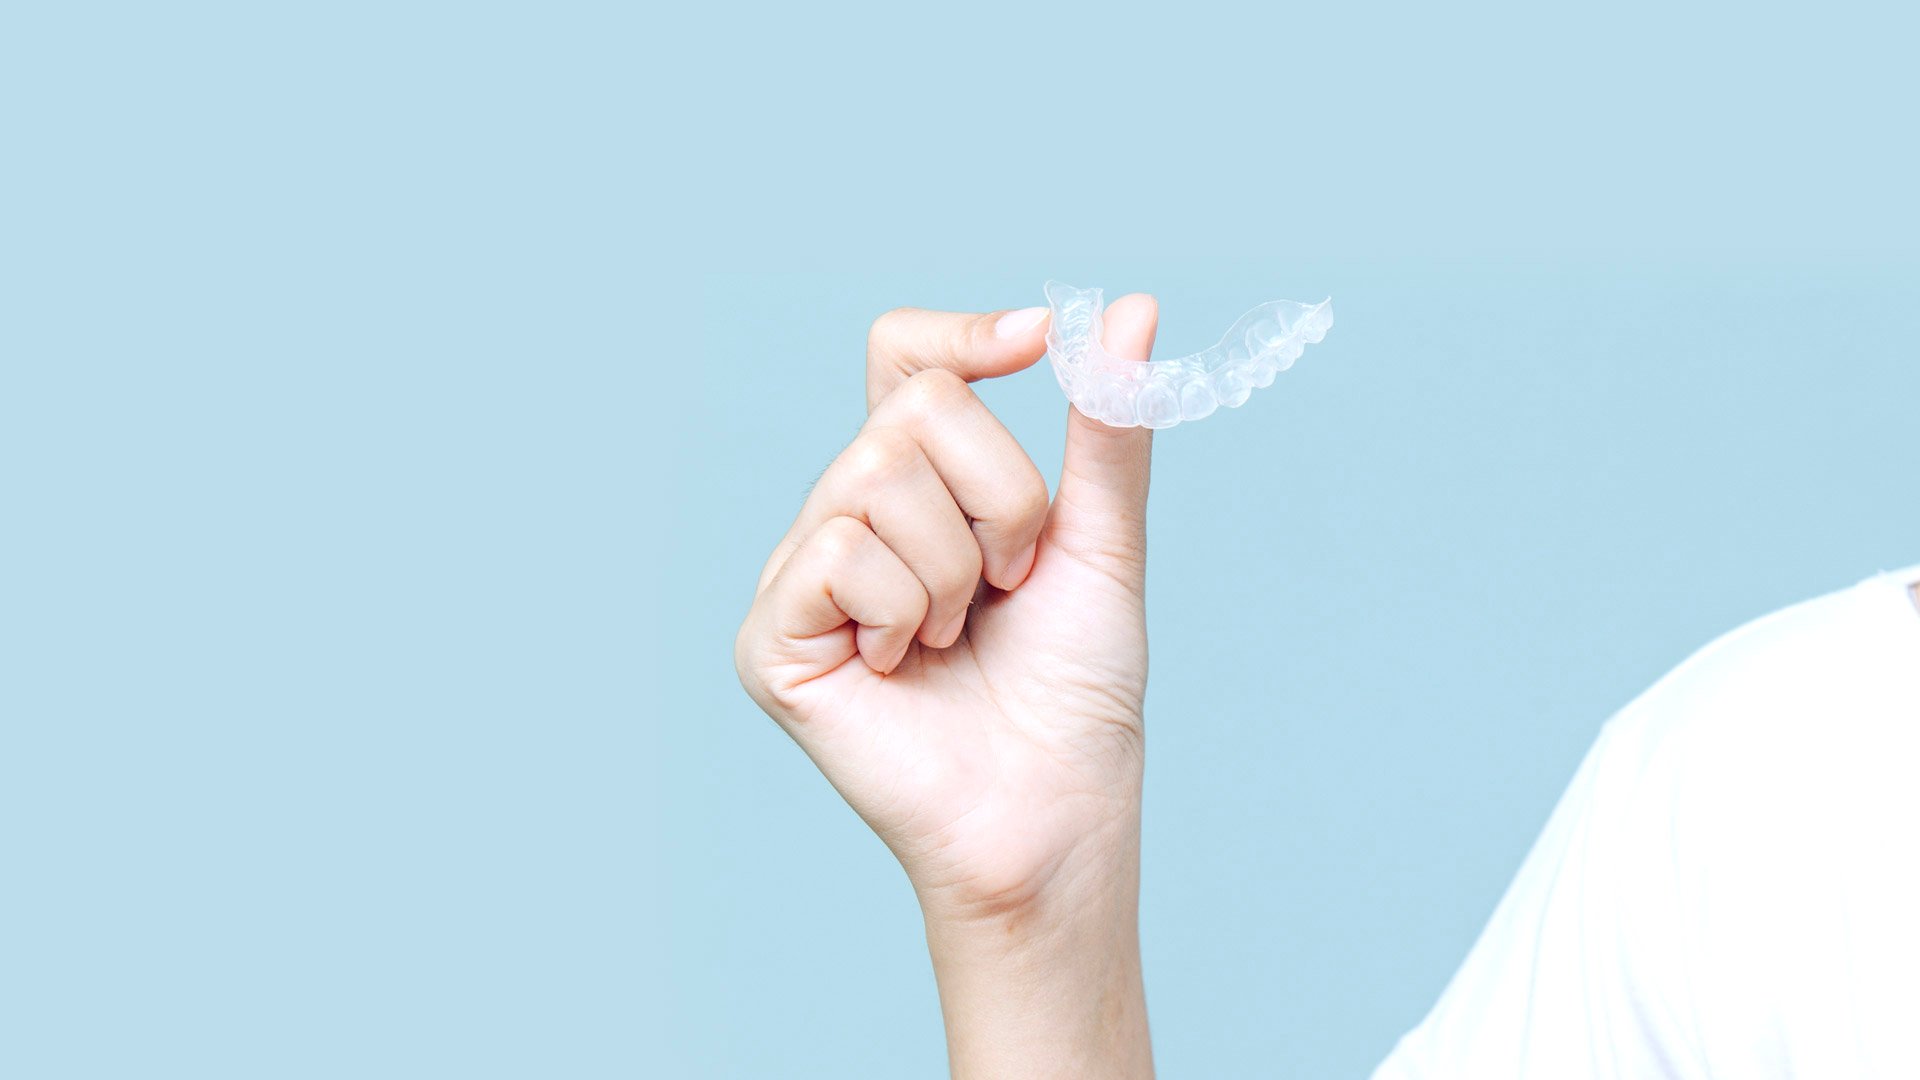 A hand holds an Invisalign clear aligner against a blue background